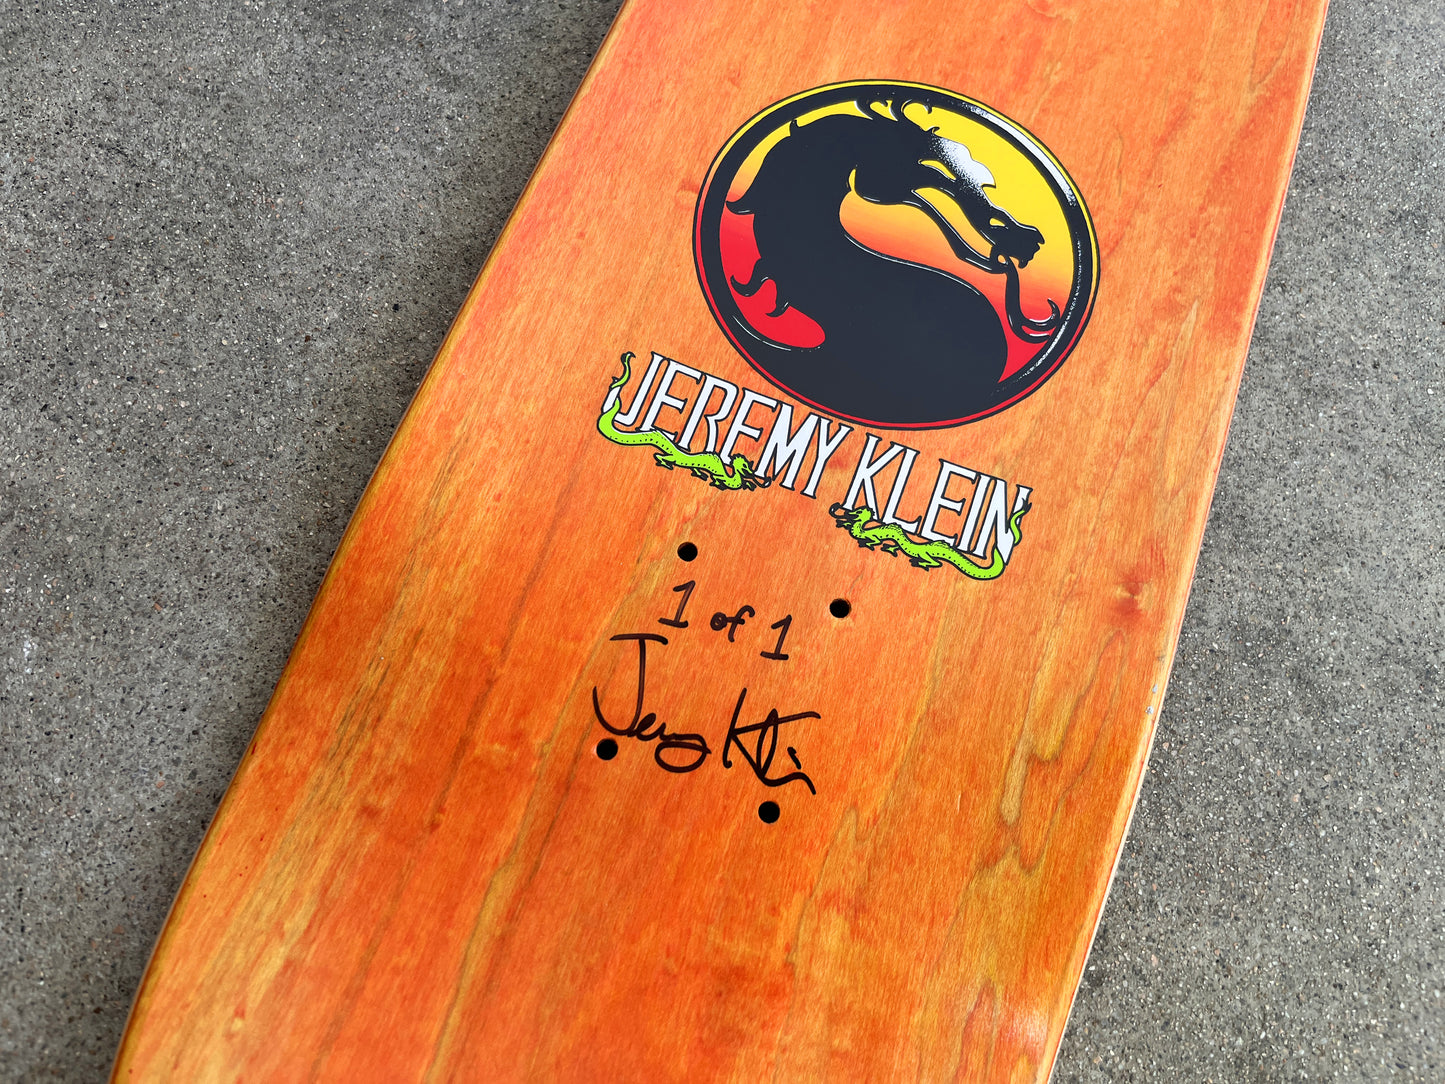 1 of 1 SIGNED jeremy klein dragon 8.0 X 31.75 HAND SCREENED CHROME BLOOD